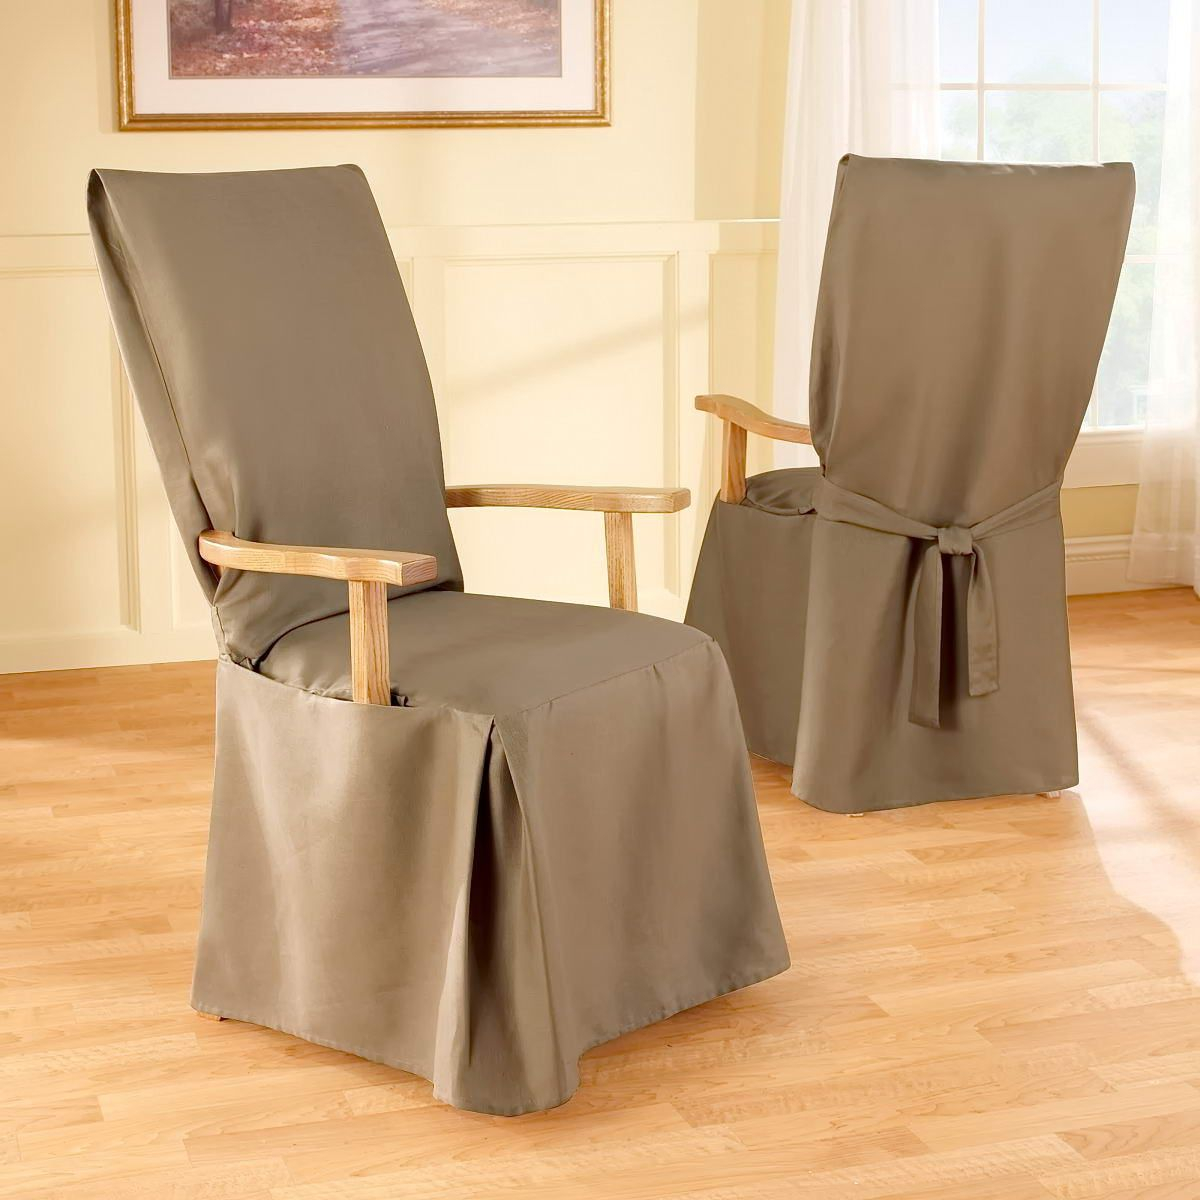 Slipcovers For Dining Room Chairs With Arms Slipcovers For pertaining to measurements 1200 X 1200